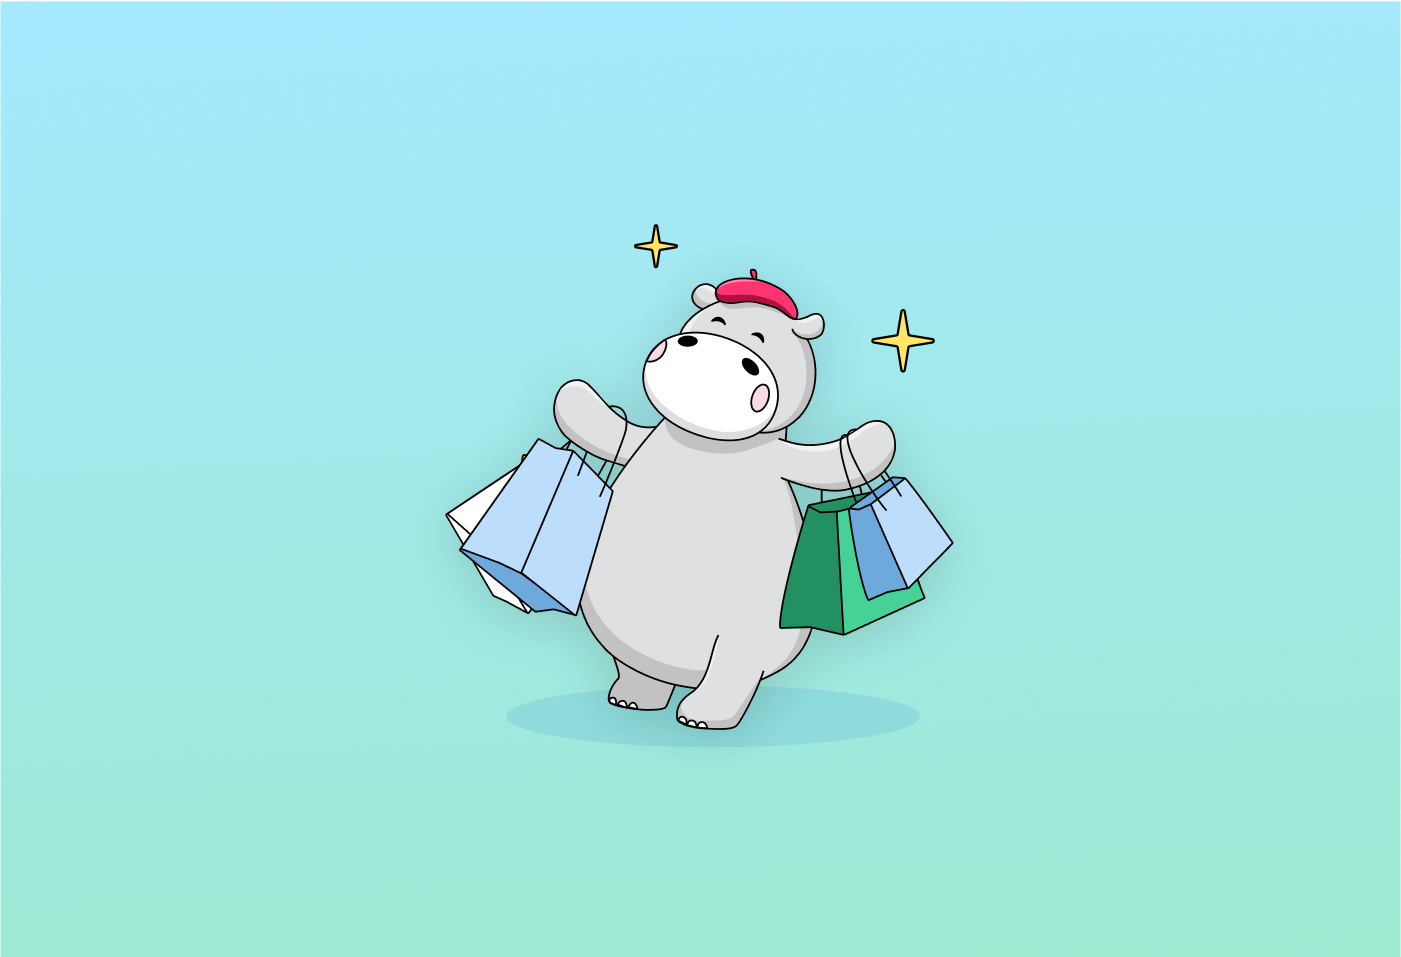 JPG hippo holding a phone and two shopping bags